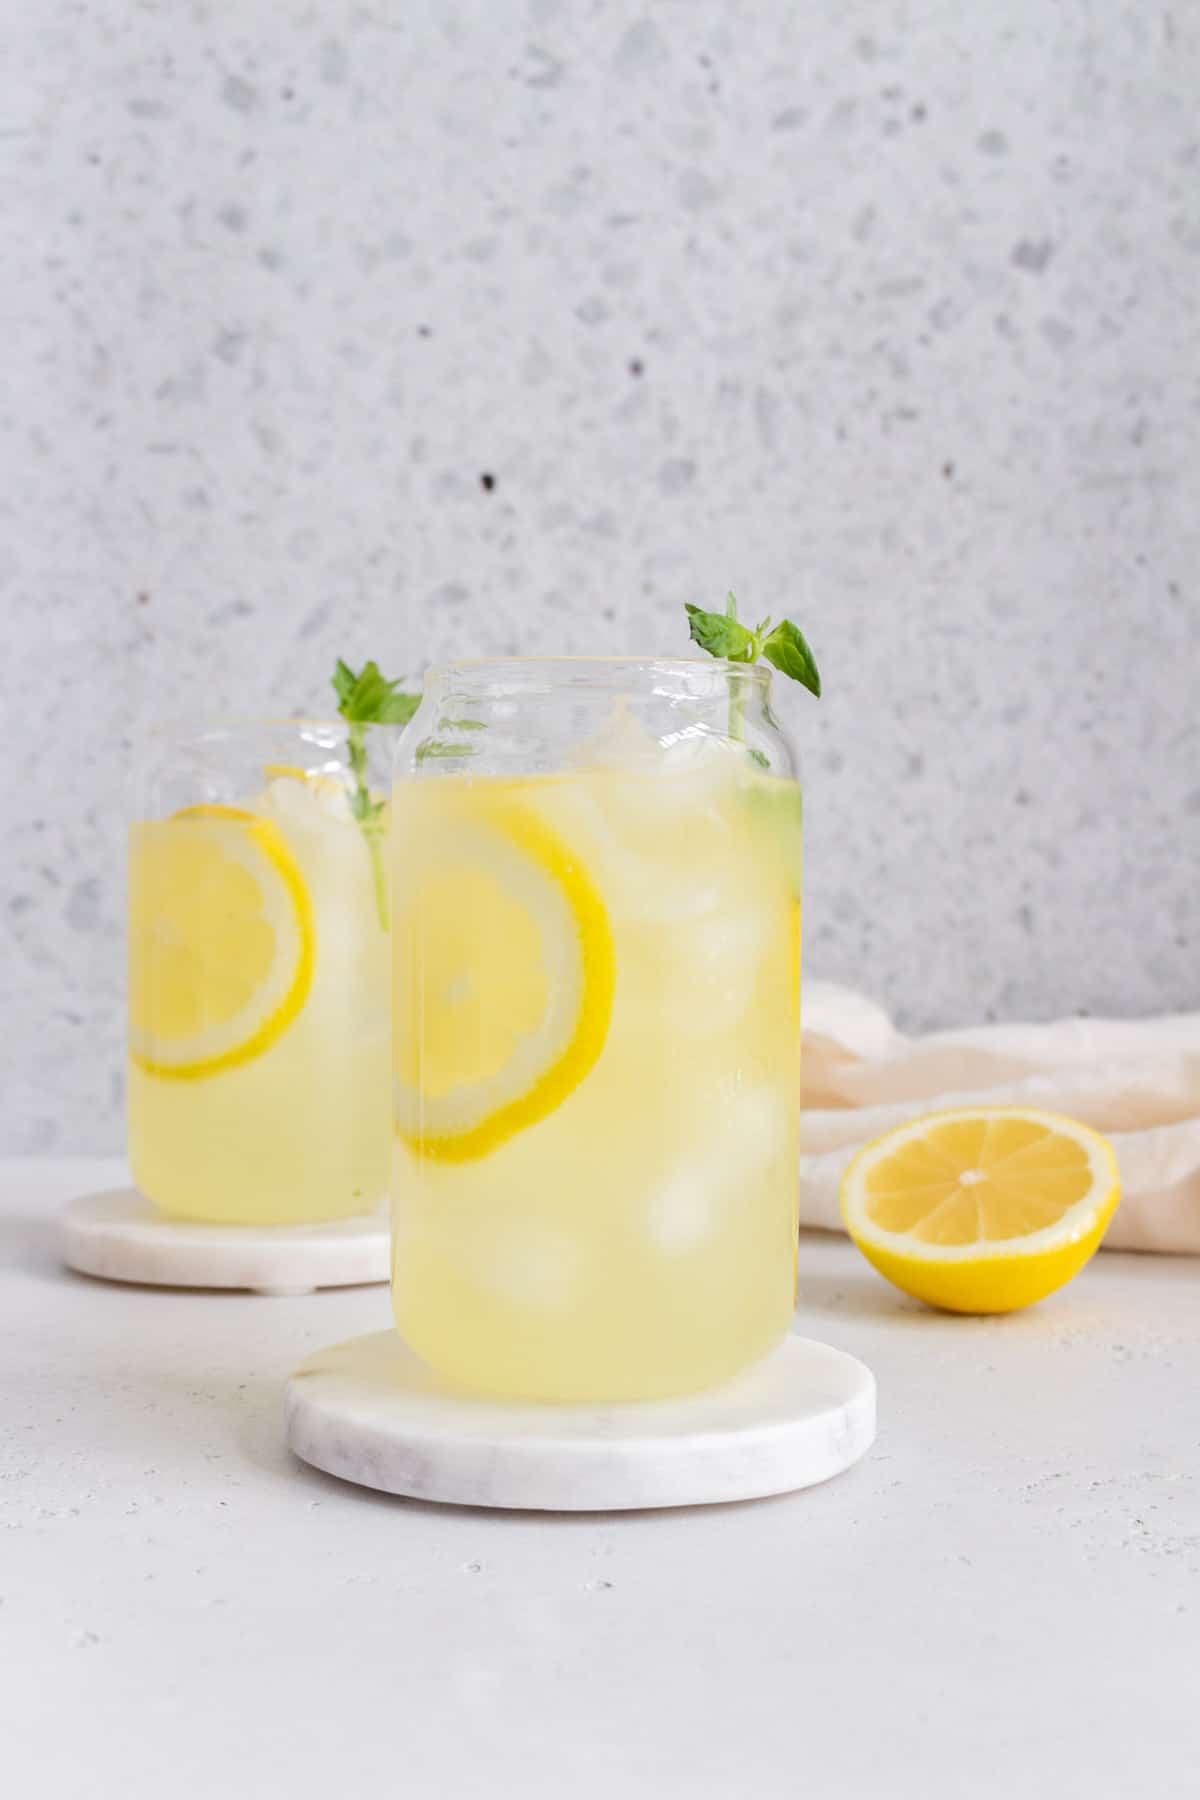 A glass of basil lemonade on a marble coaster with a second glass in the background along with a cut lemon.